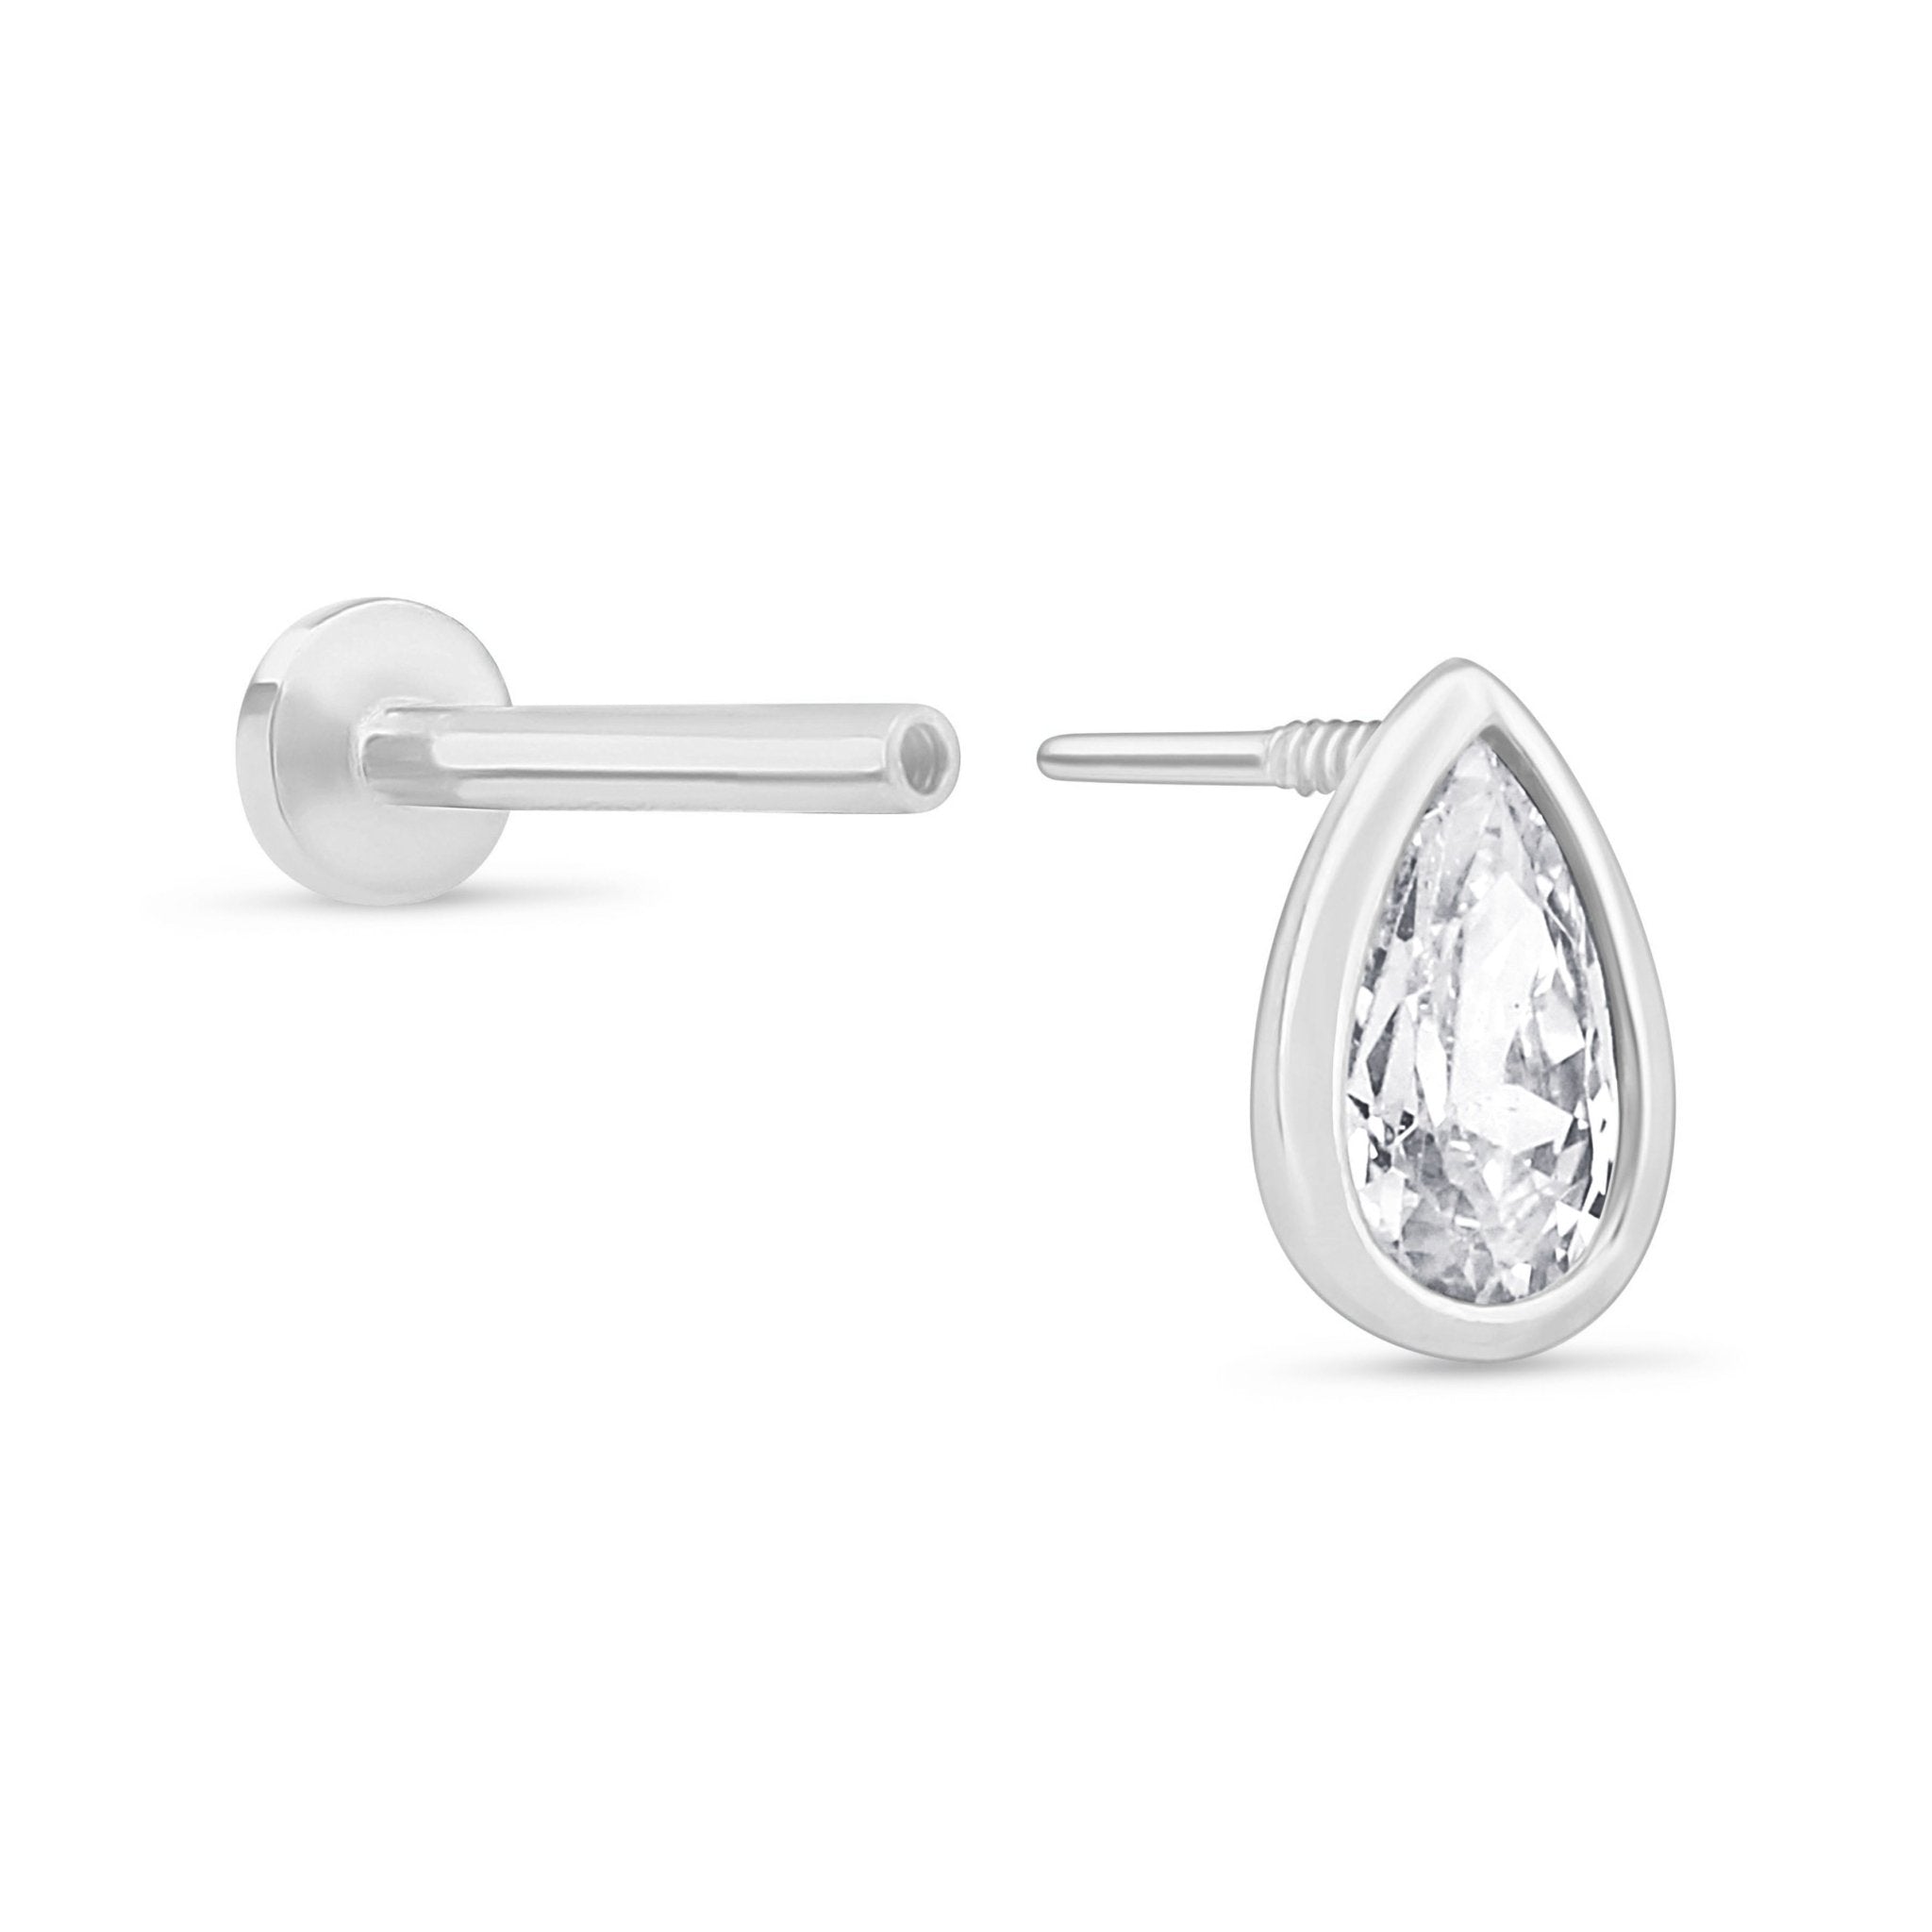 Bezel Set Pear Earring in Solid White Gold Earrings Estella Collection #product_description# 18602 new New Arrivals test test mechanic #tag4# #tag5# #tag6# #tag7# #tag8# #tag9# #tag10#